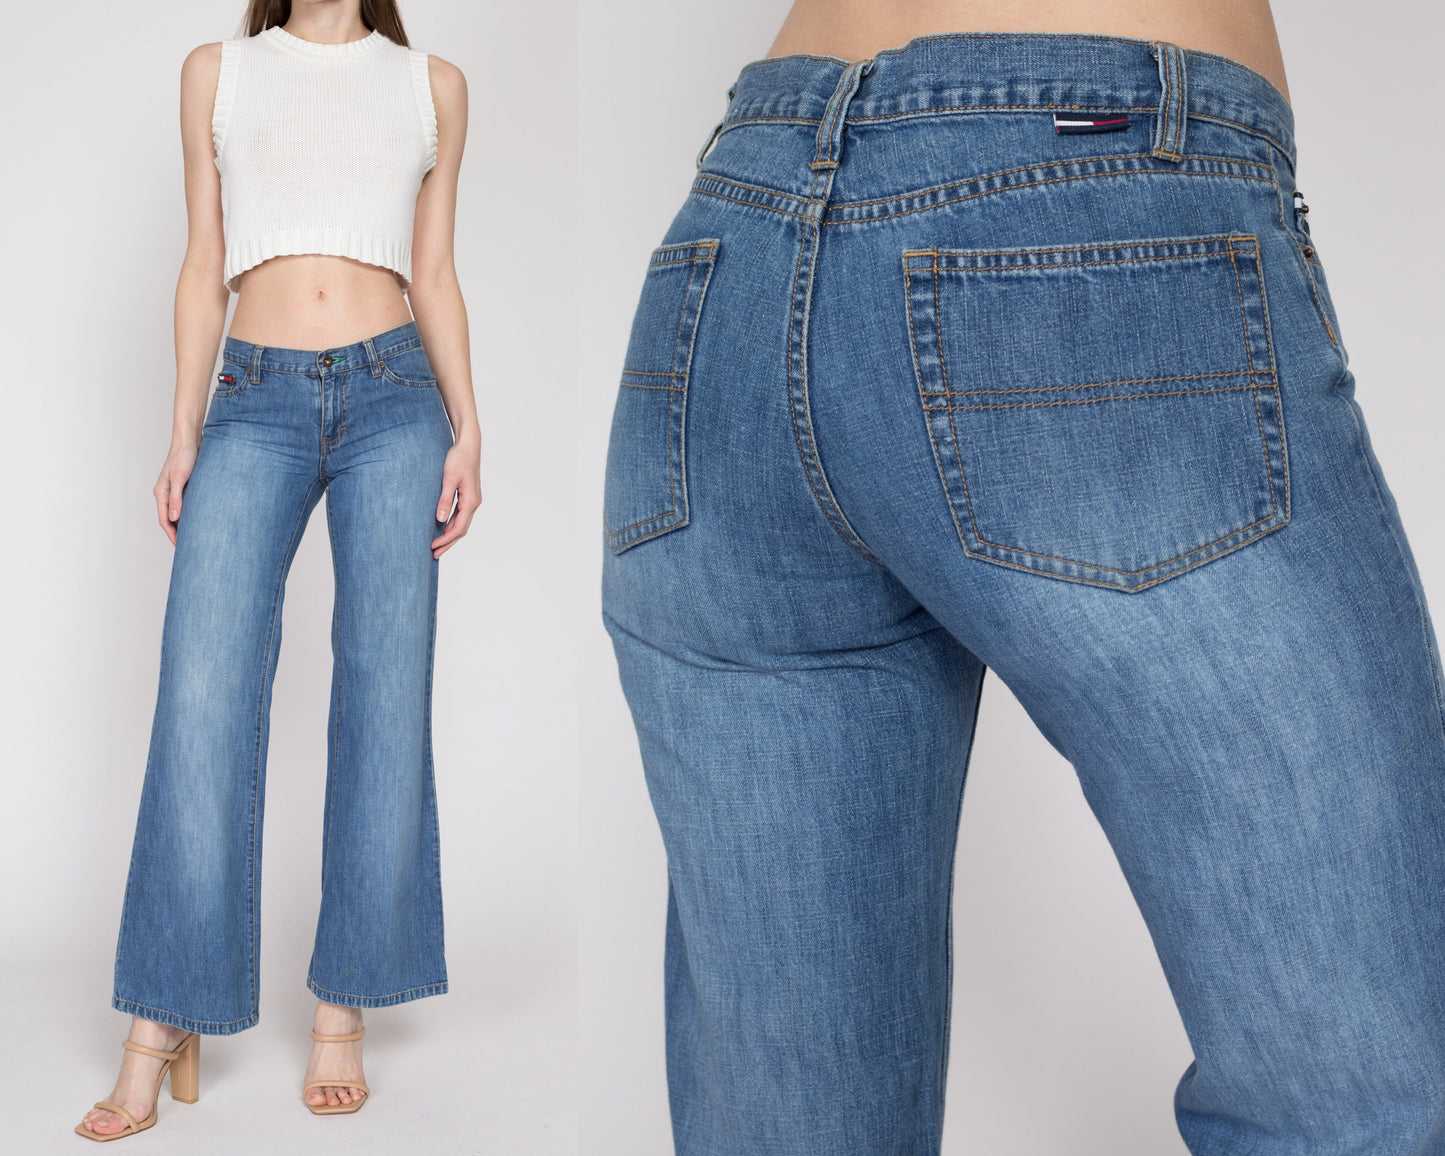 Small Y2K Tommy Hilfiger Low Rise Jeans | Vintage Faded Denim Wide Leg Bootcut Flared Jeans